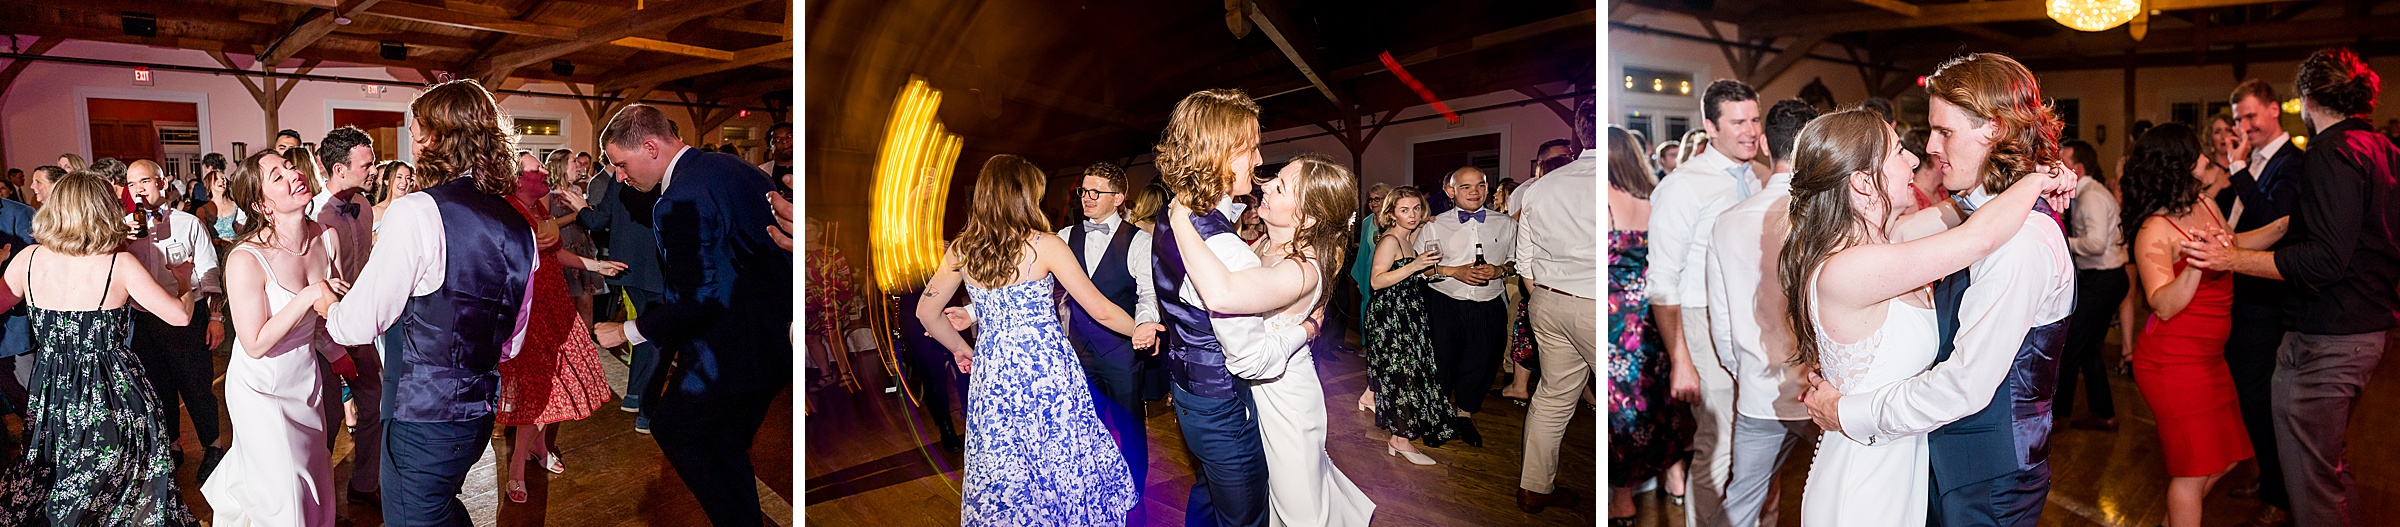 A bride and groom dance among guests at a reception. The bride wears a white dress, and the groom wears a suit with a blue vest. The setting features a wooden ceiling with lights and decor.